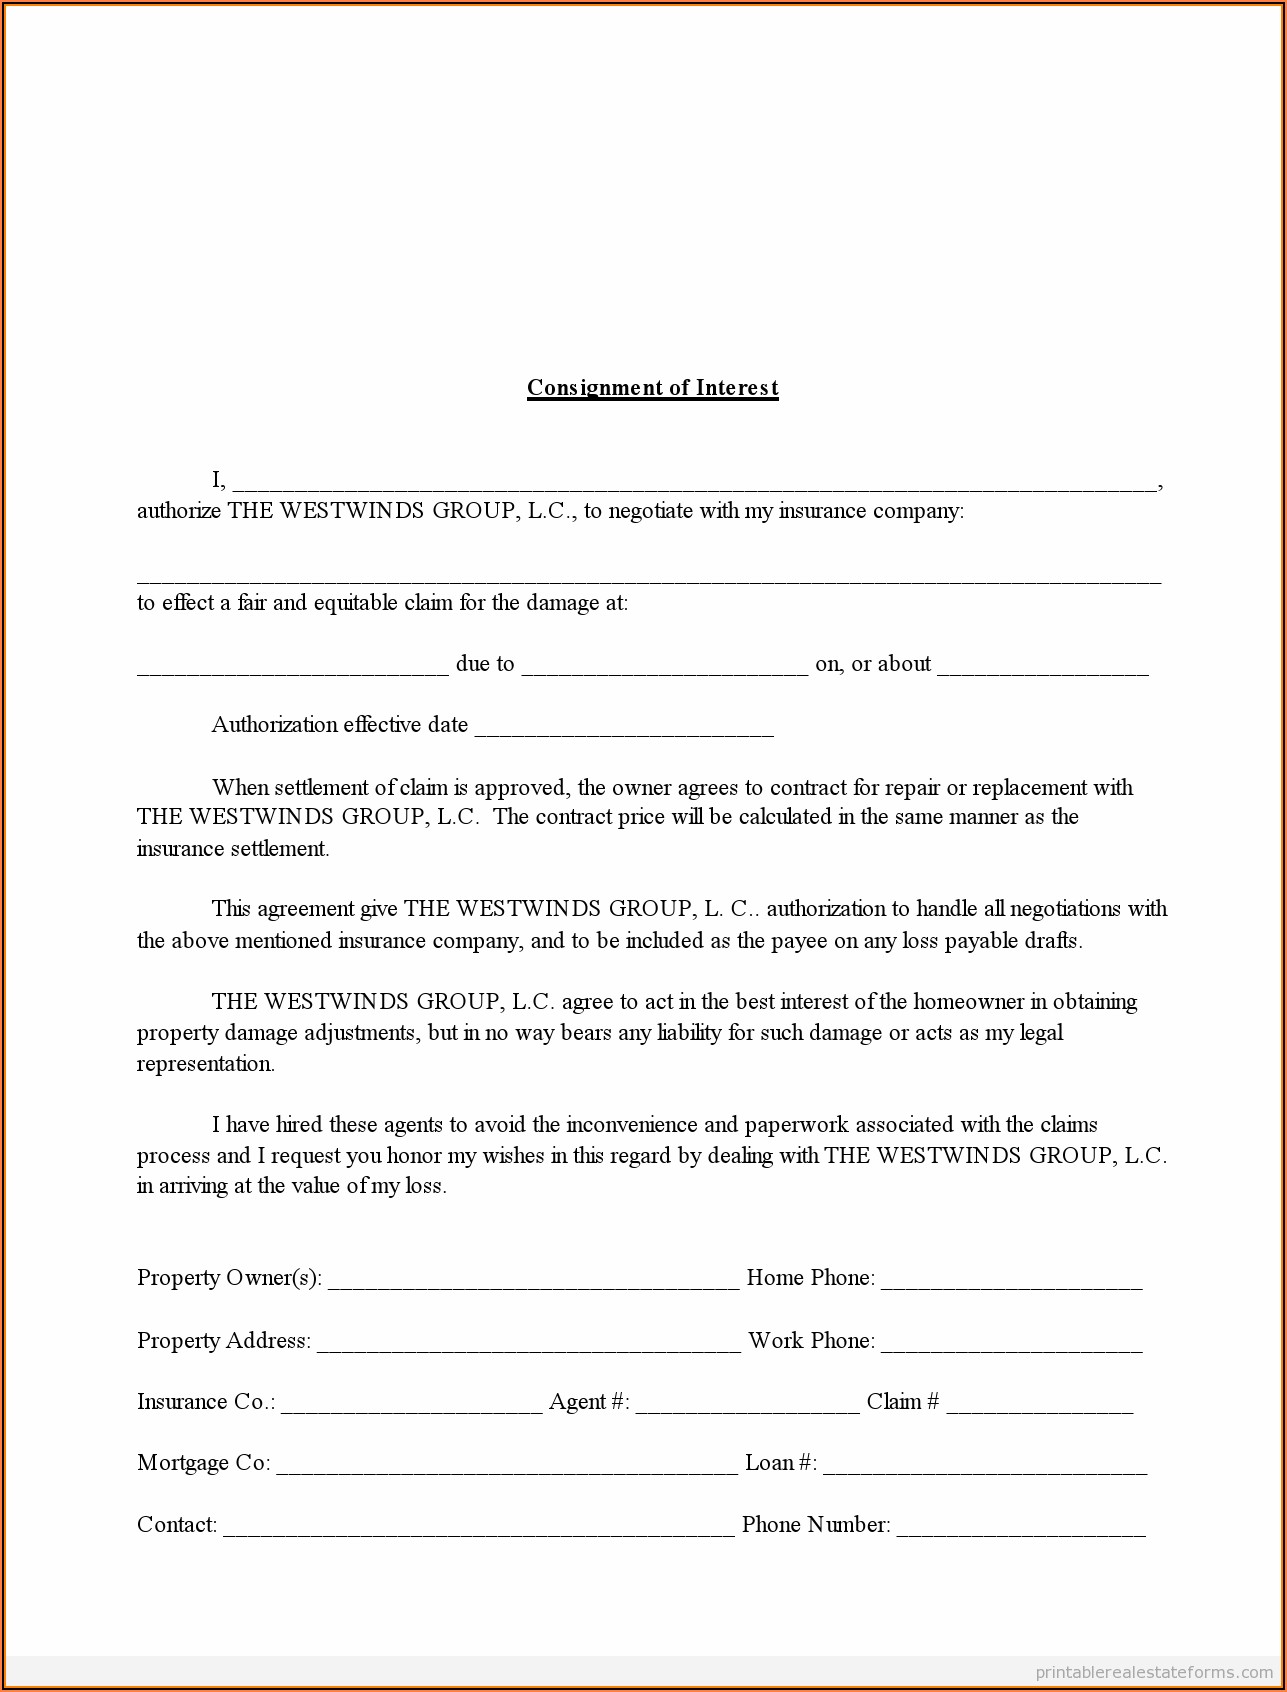 Homeowners Insurance Claim Form Template